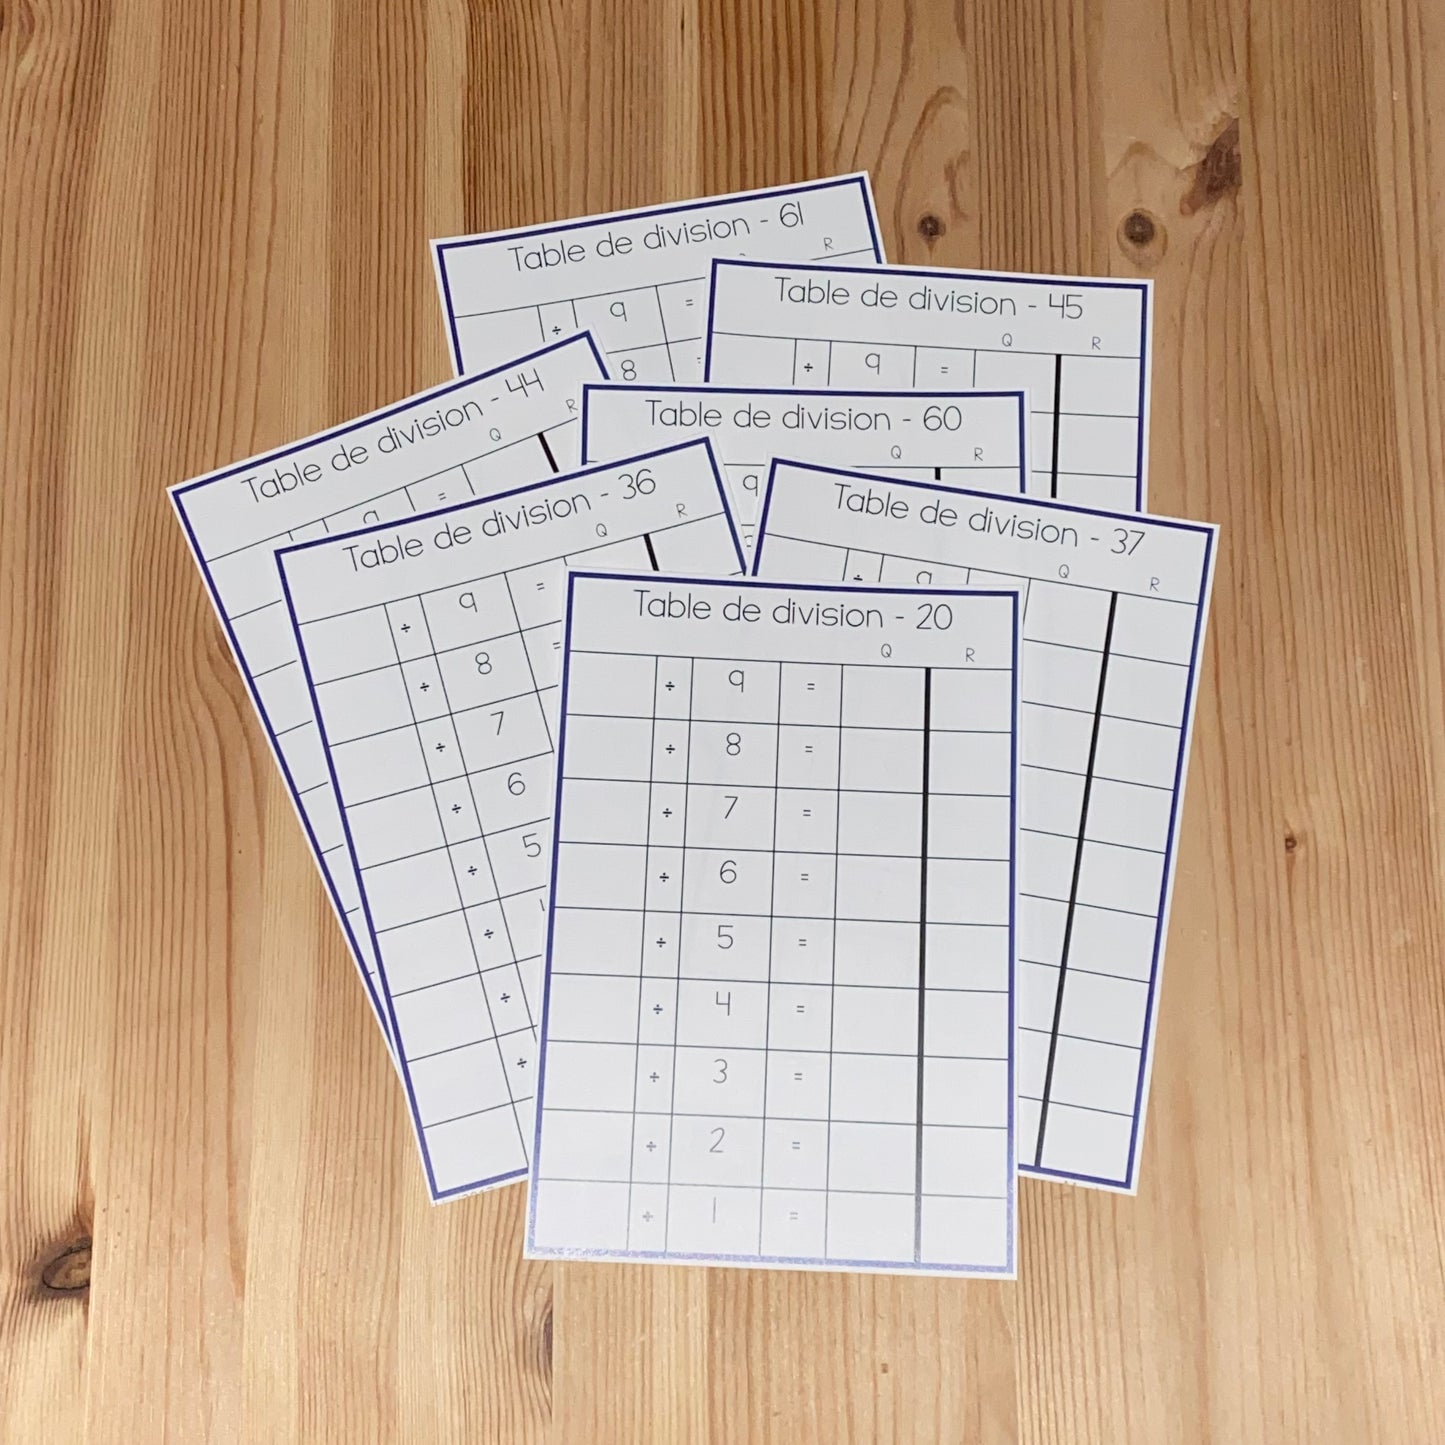 Tables de division (division chart tables - french) - montessorikiwi